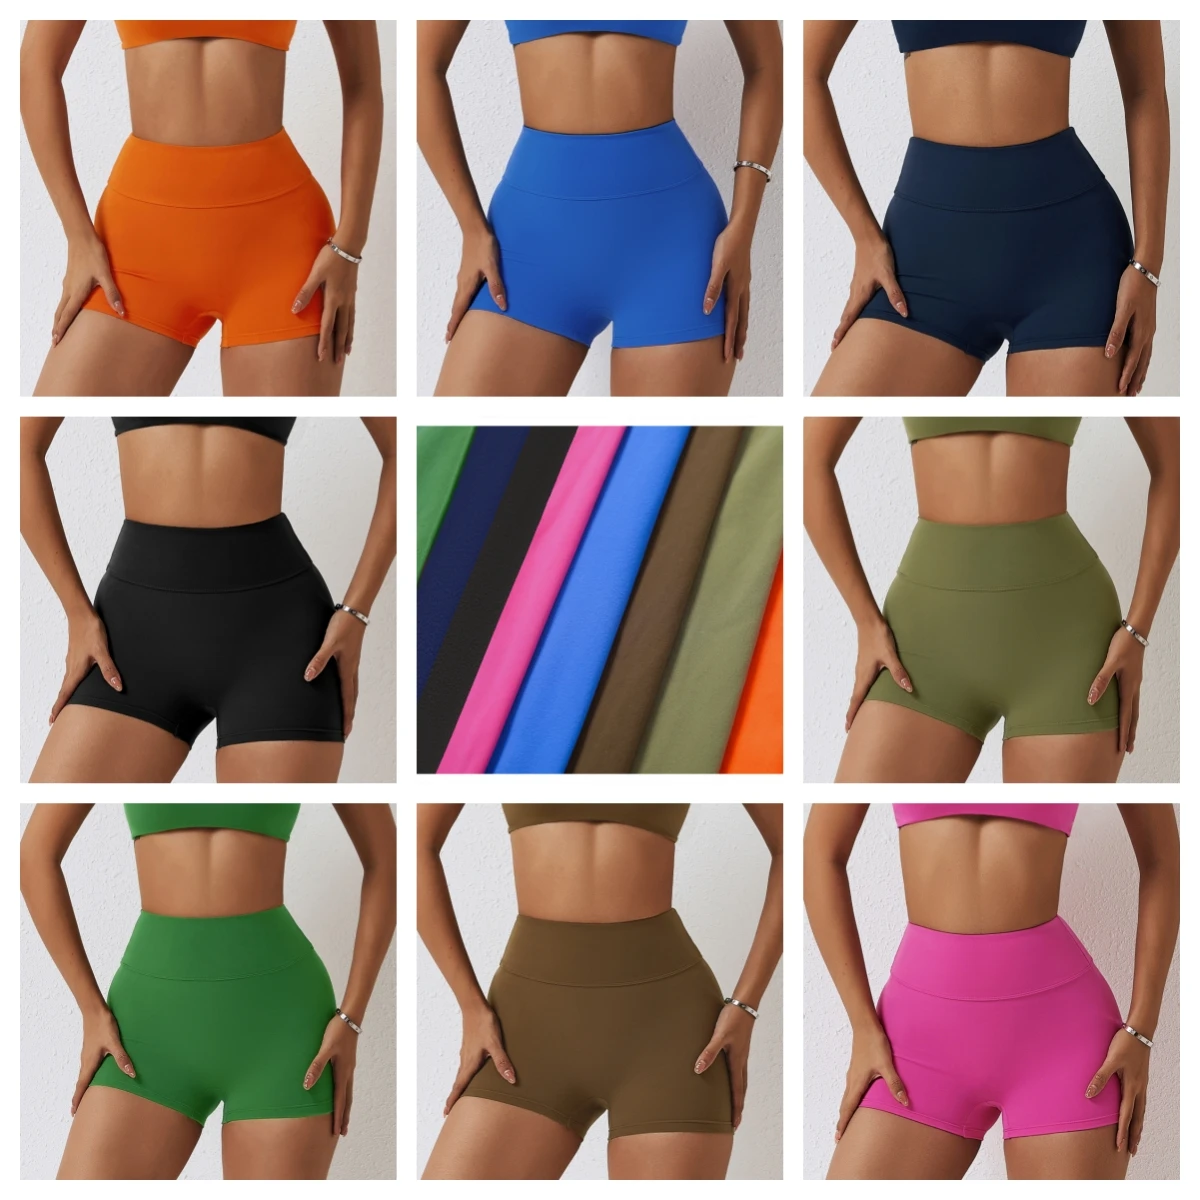 lulu Seamless yoga shorts suitable for women training jogging wear tight butt fitness shorts quick dry sweatpants